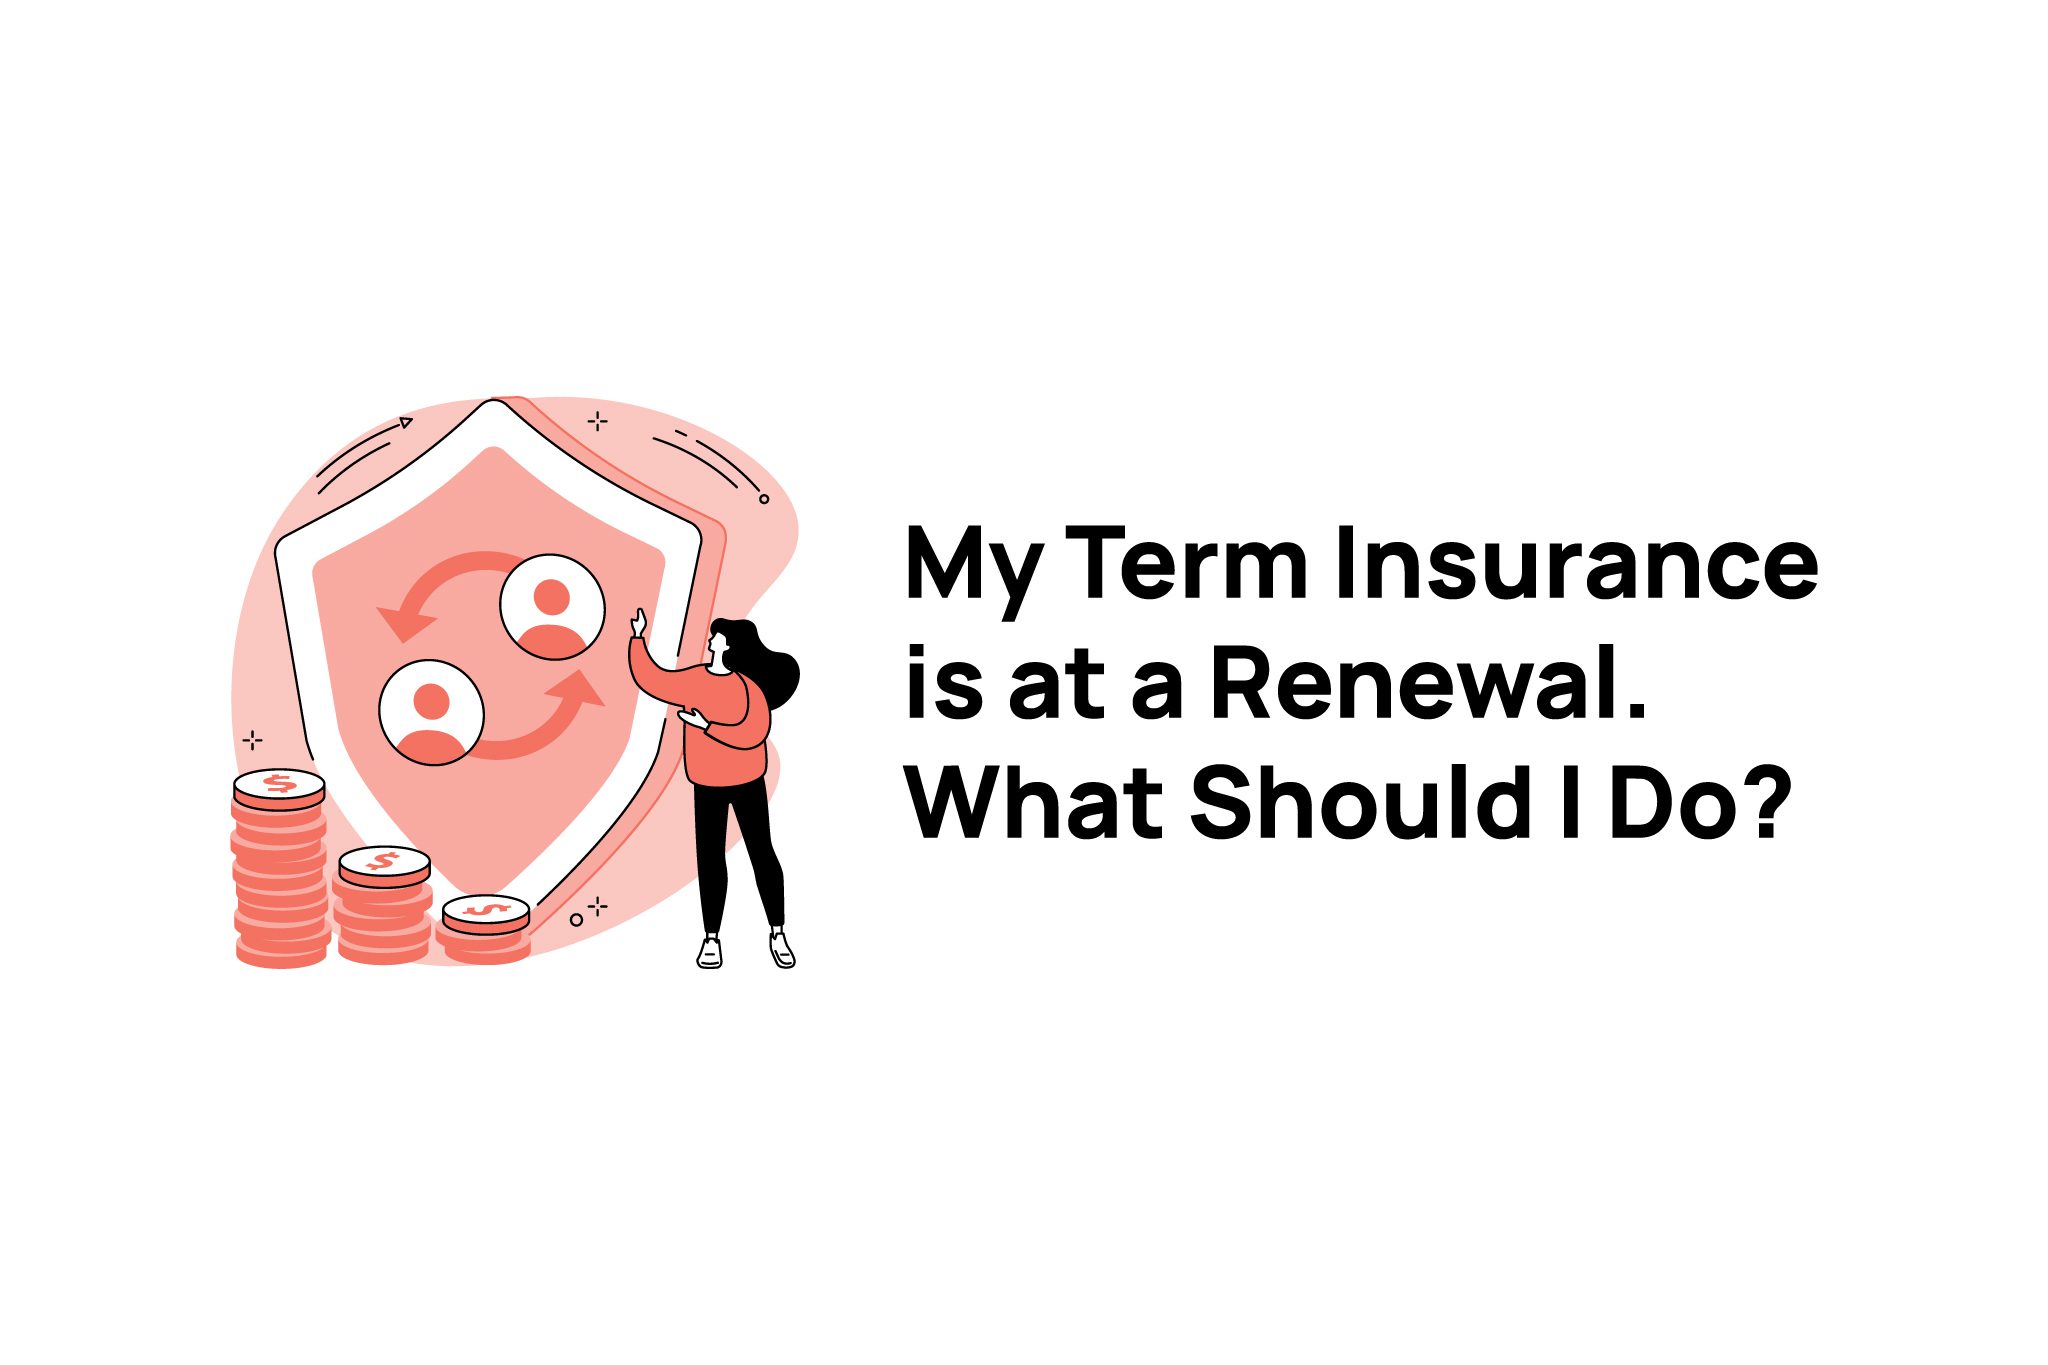 My Term Insurance is at a Renewal. What Should I Do?